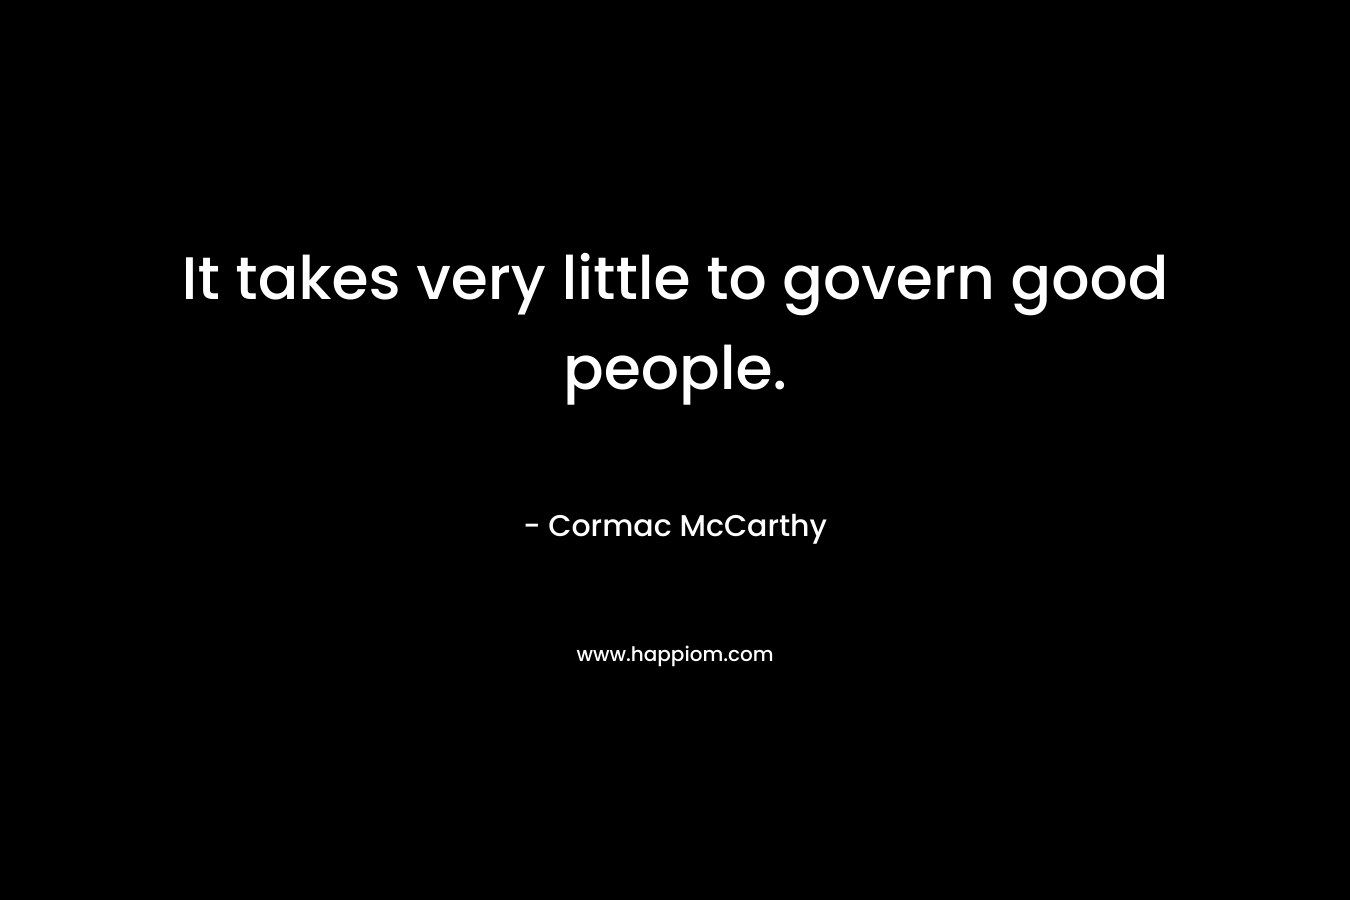 It takes very little to govern good people.